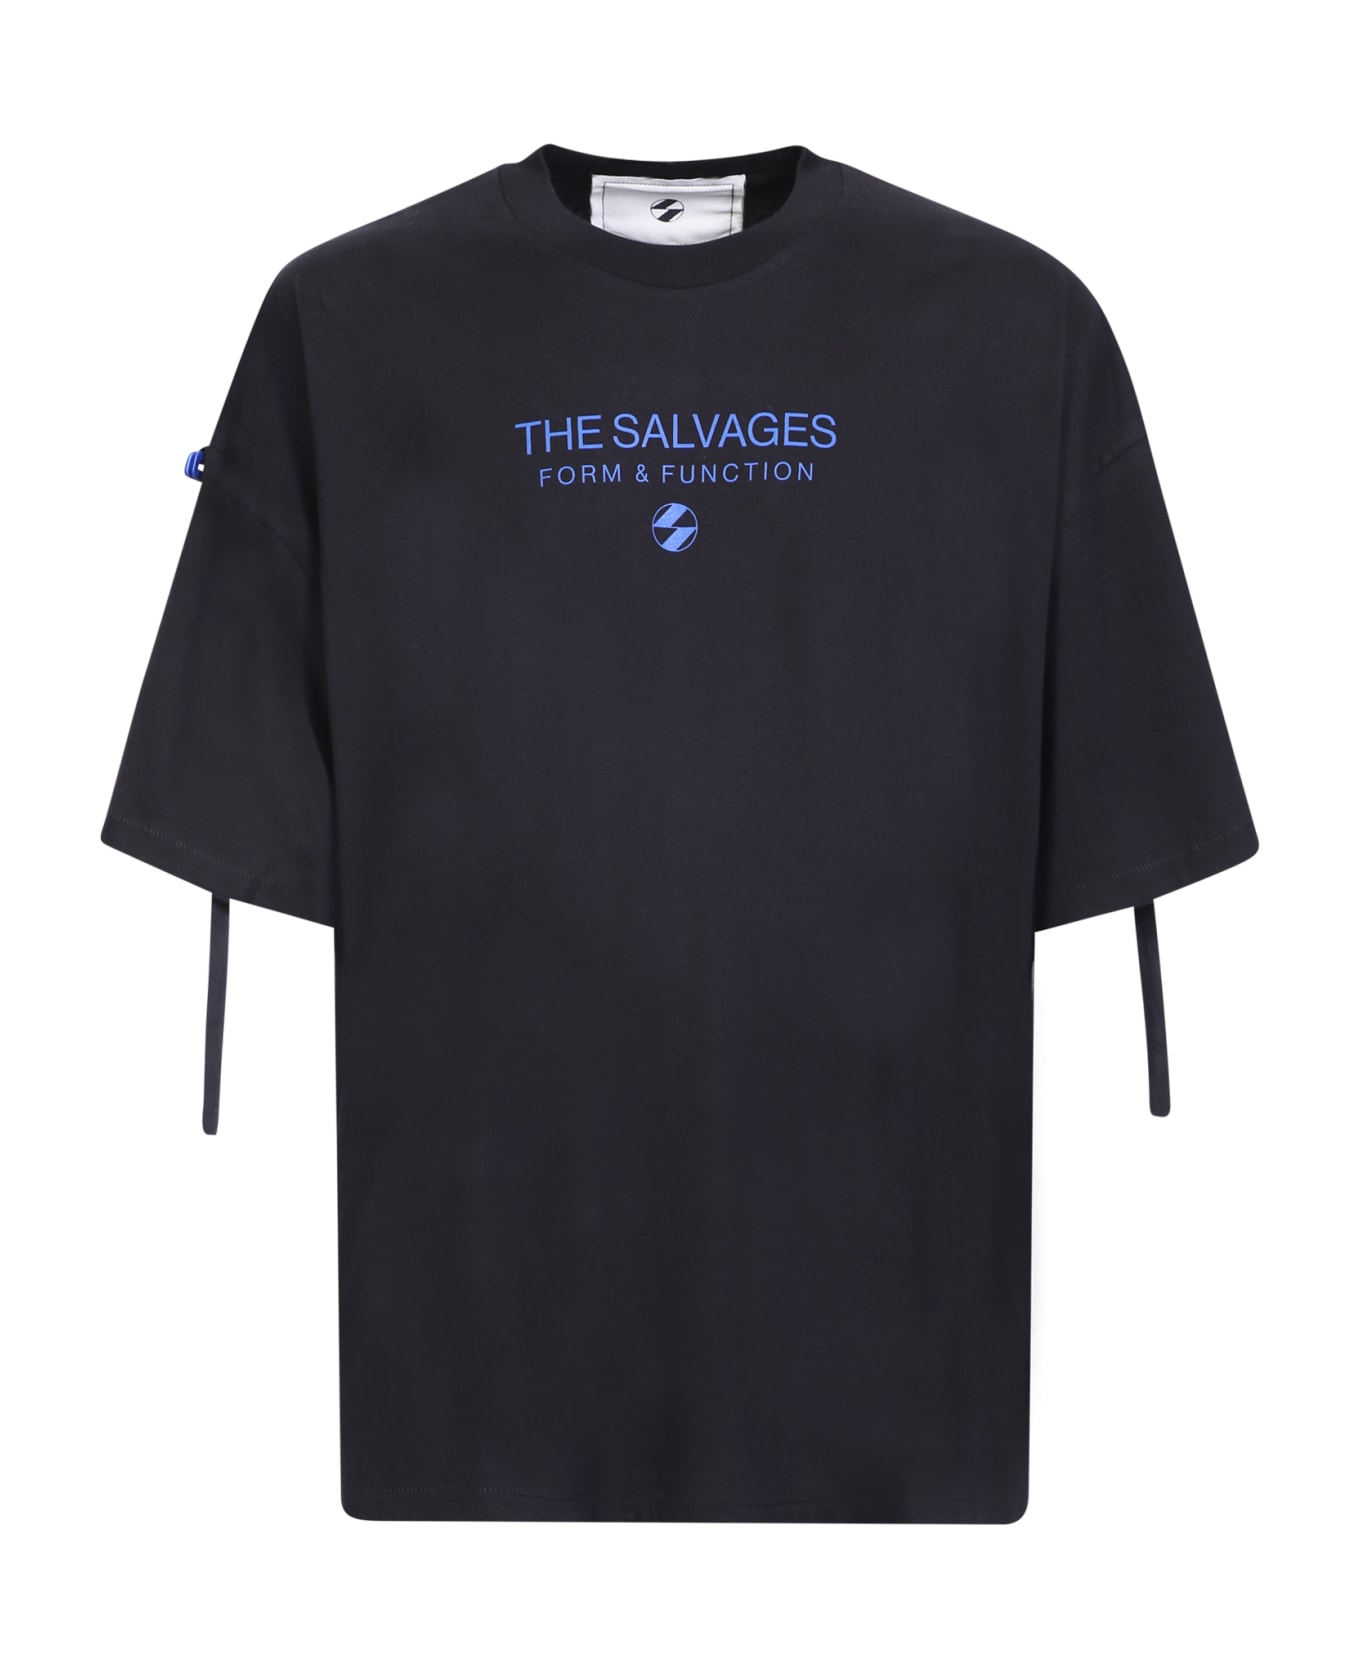 The Salvages From & Function D-ring T-shirt - Black シャツ